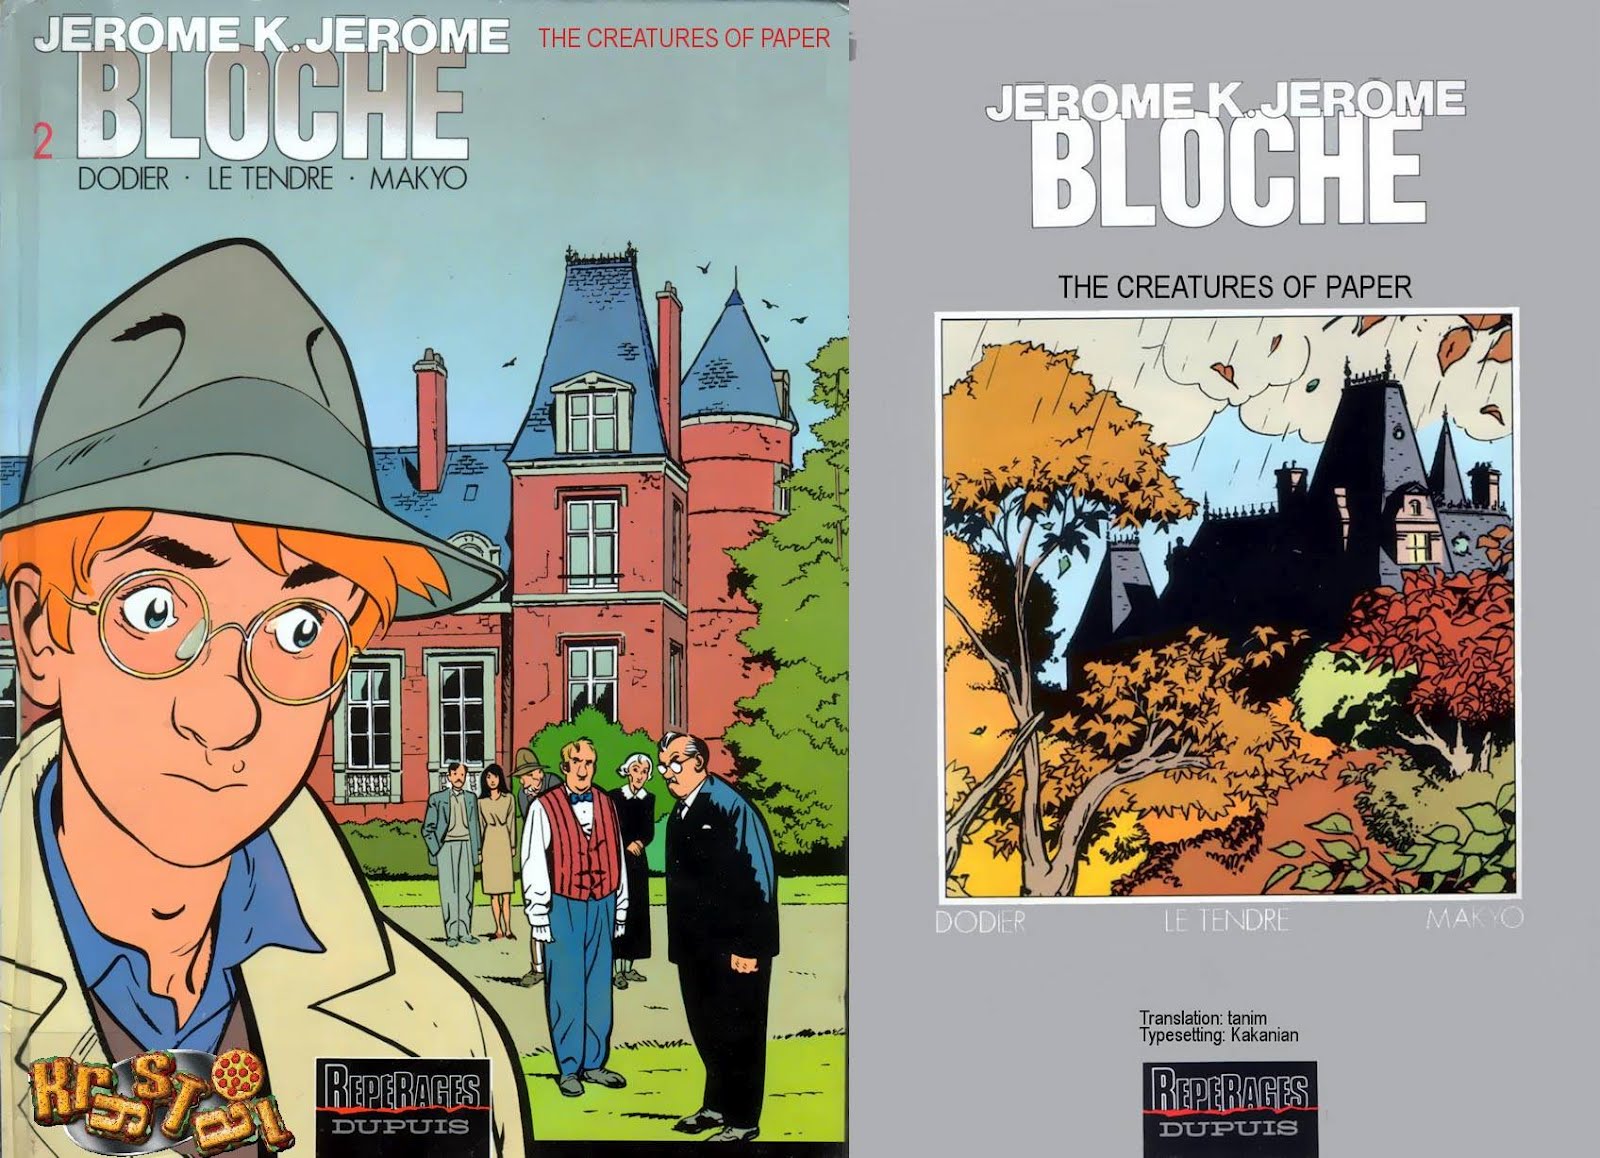 Jerome Bloche : The Creatures of Paper ~ Comic Book Source